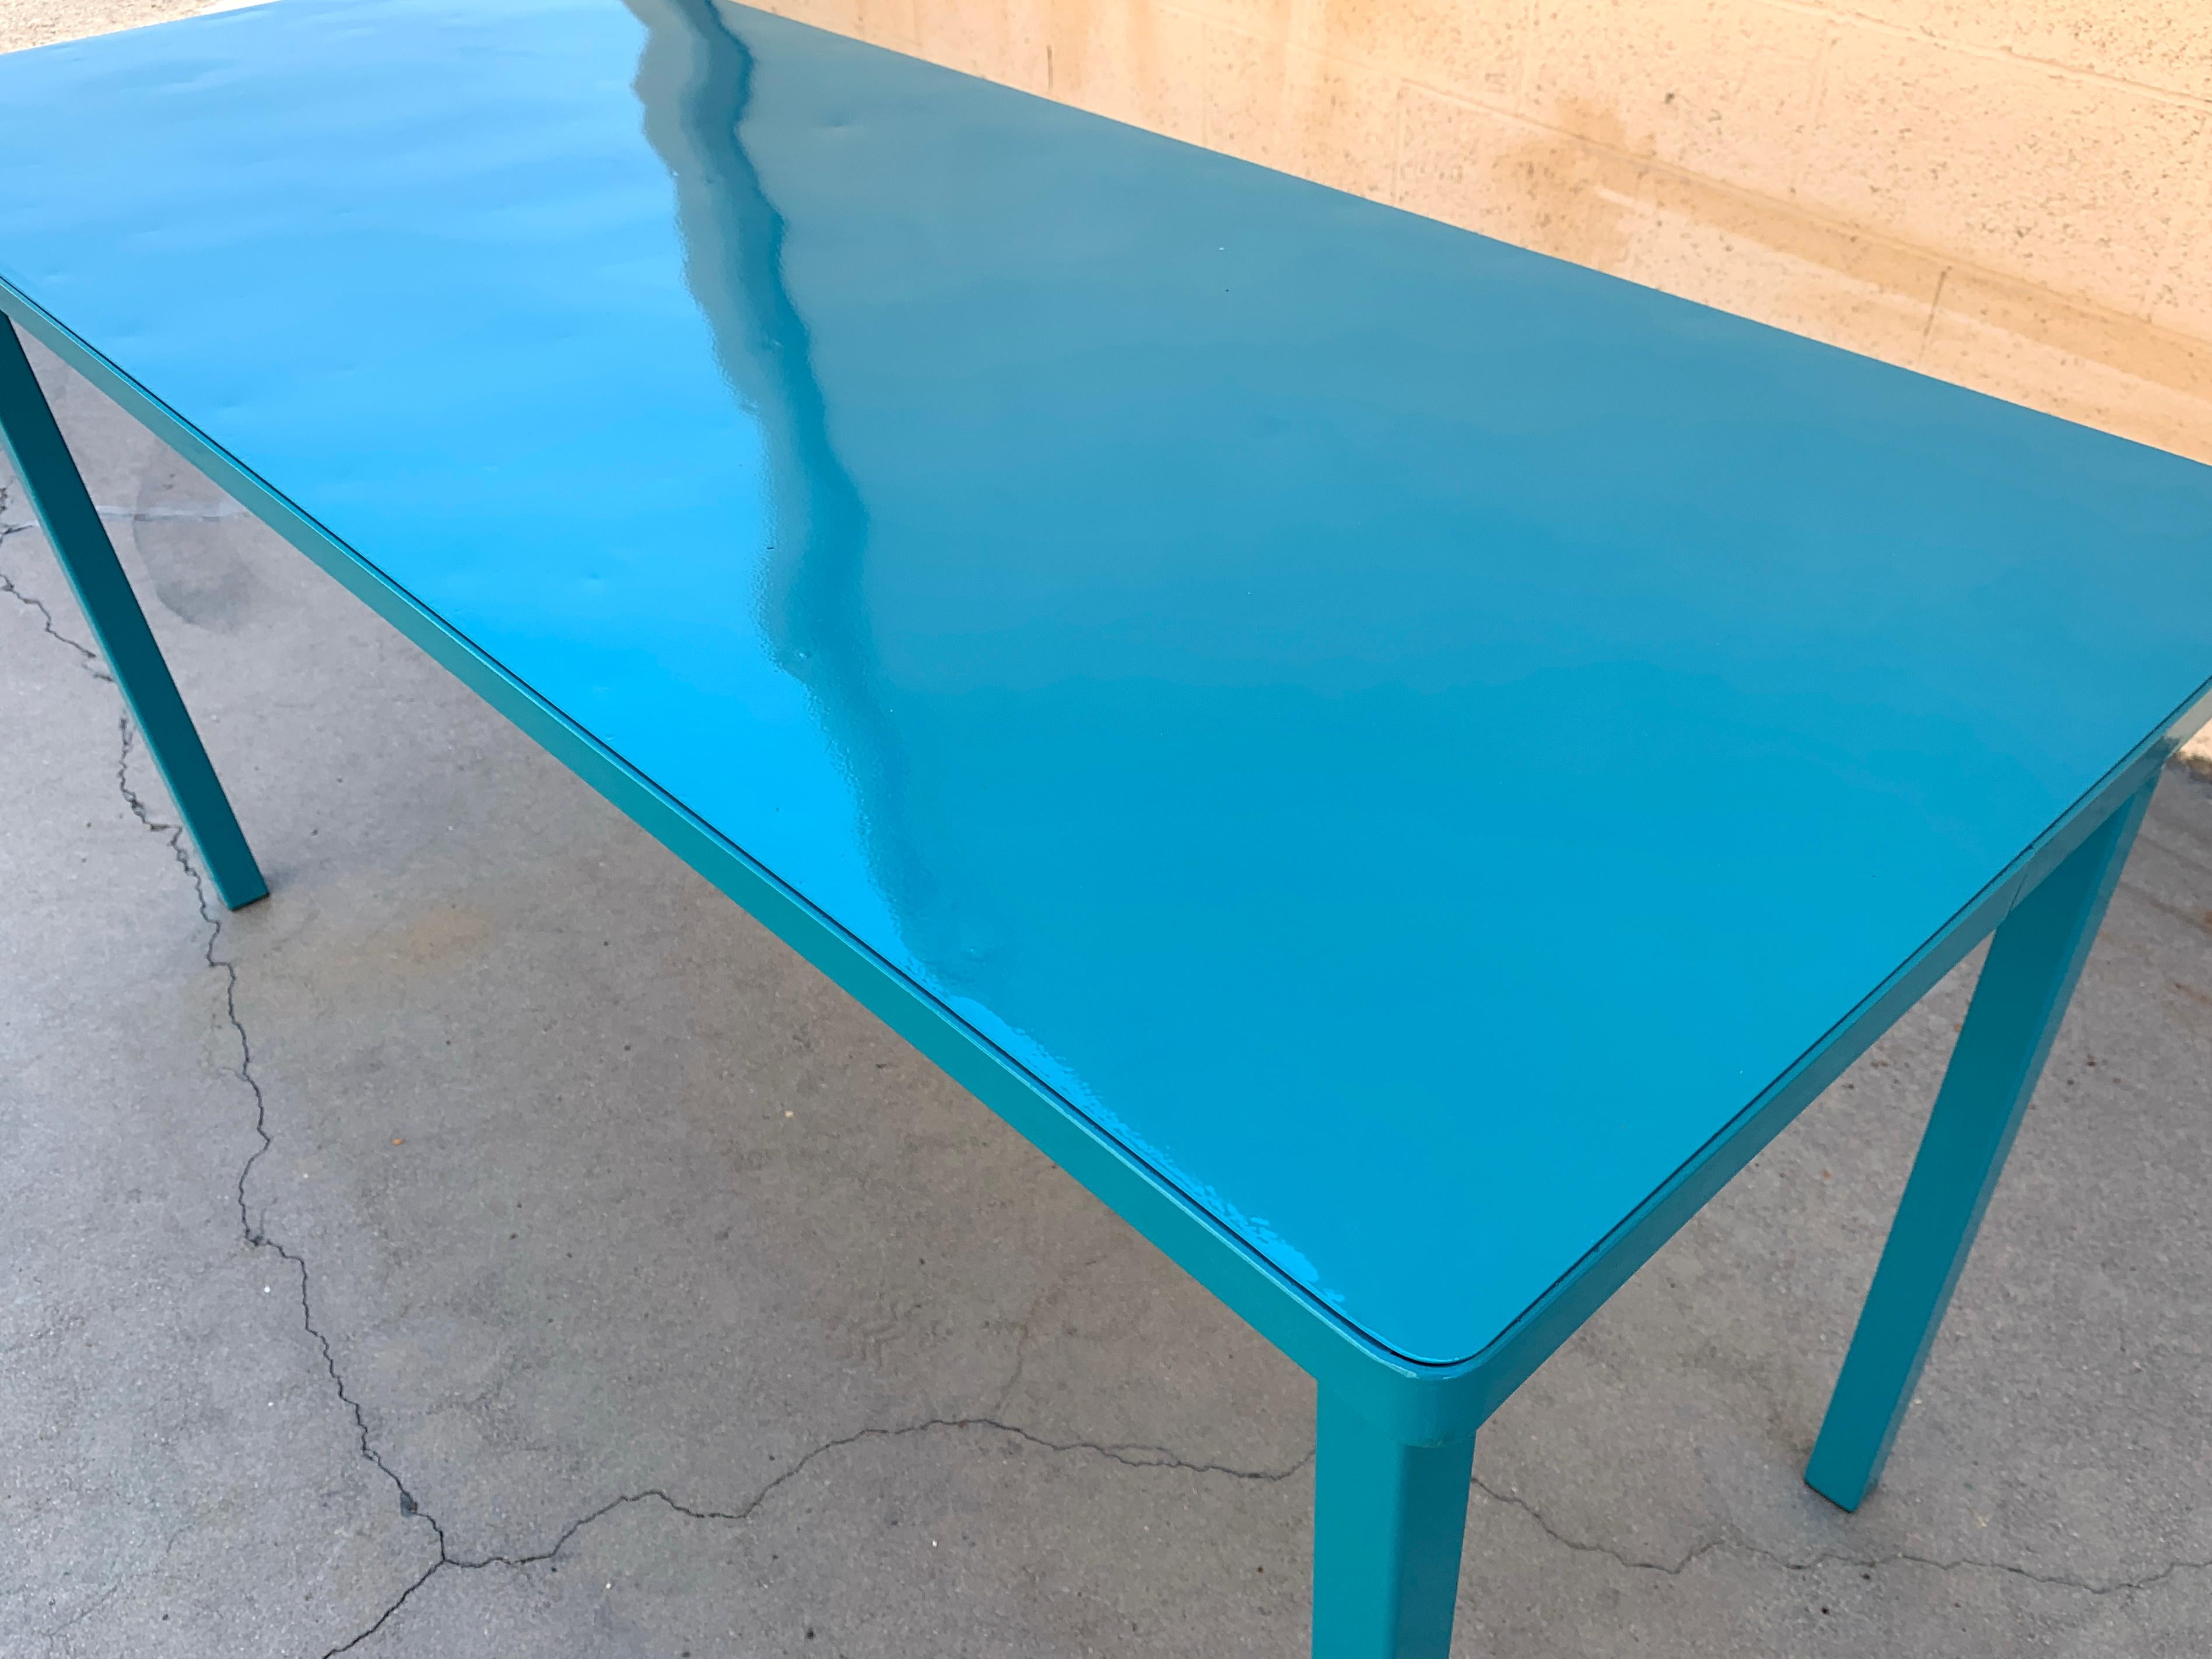 Powder-Coated Midcentury Tanker Table in an Uncommon Size, Refinished in Teal For Sale